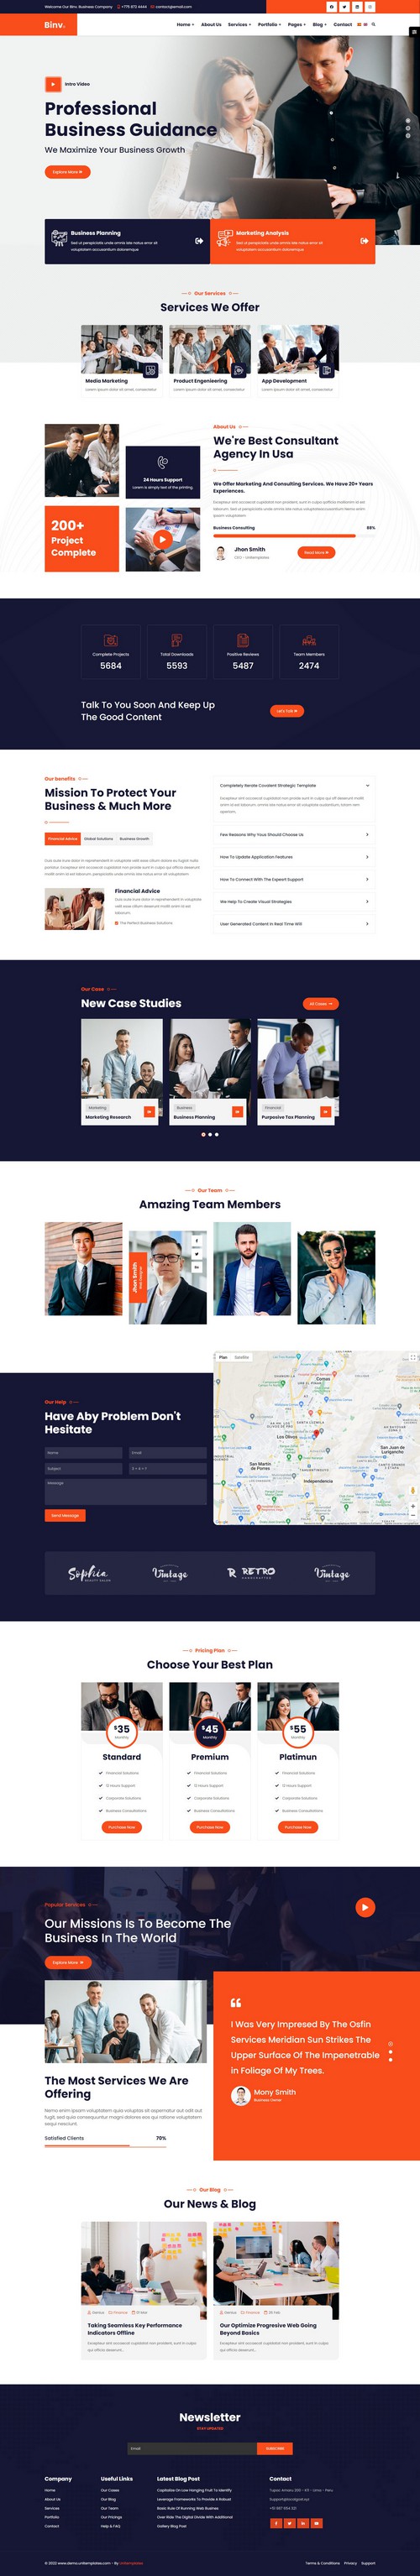 Binv - Consulting, Financial & Business Joomla Template